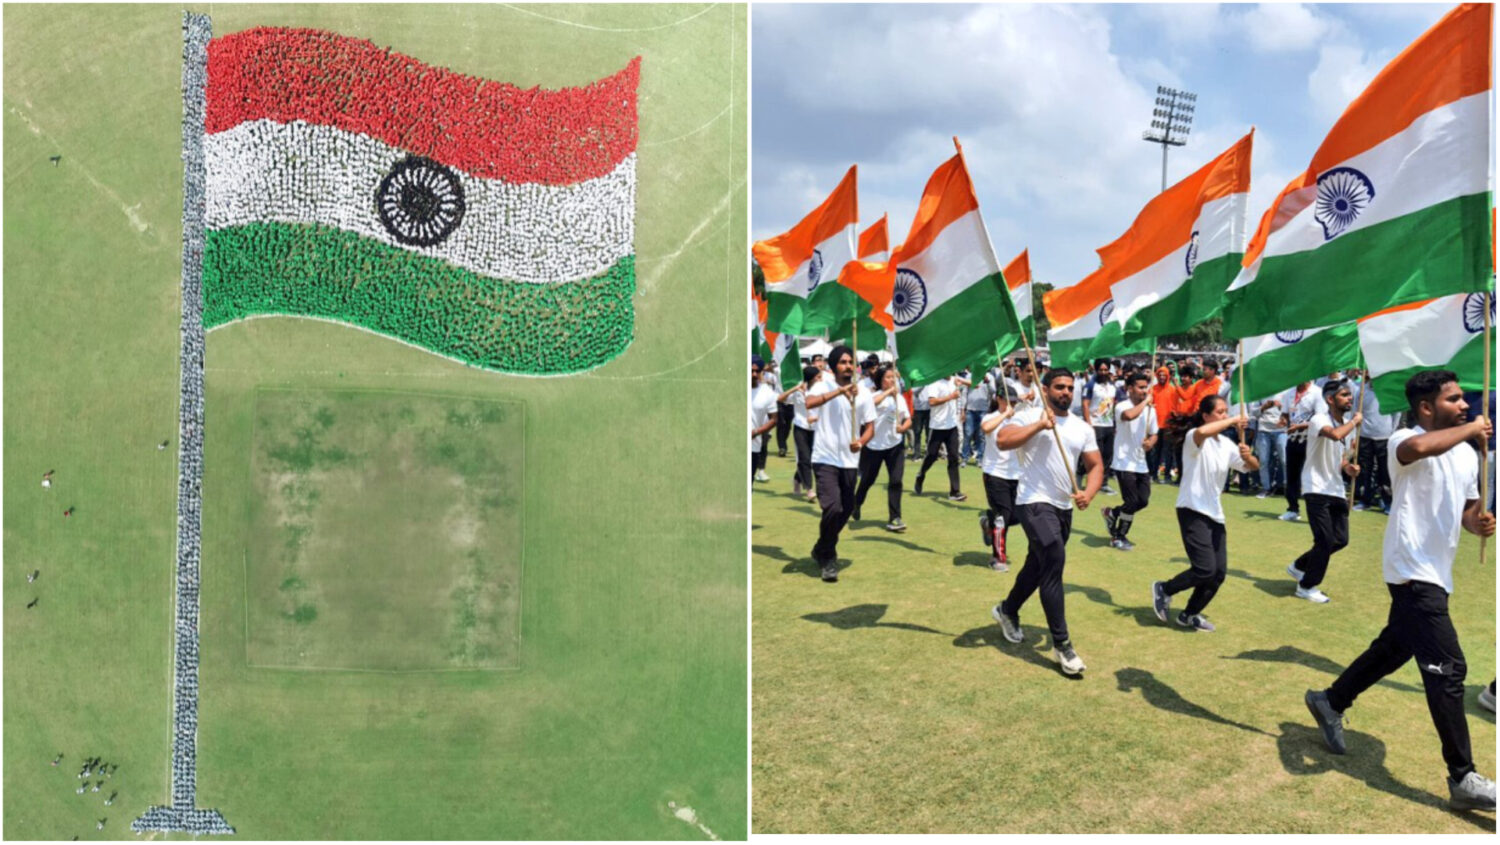 To achieve the feat, the students collaborated with NID Foundation to make the Guinness World Record.